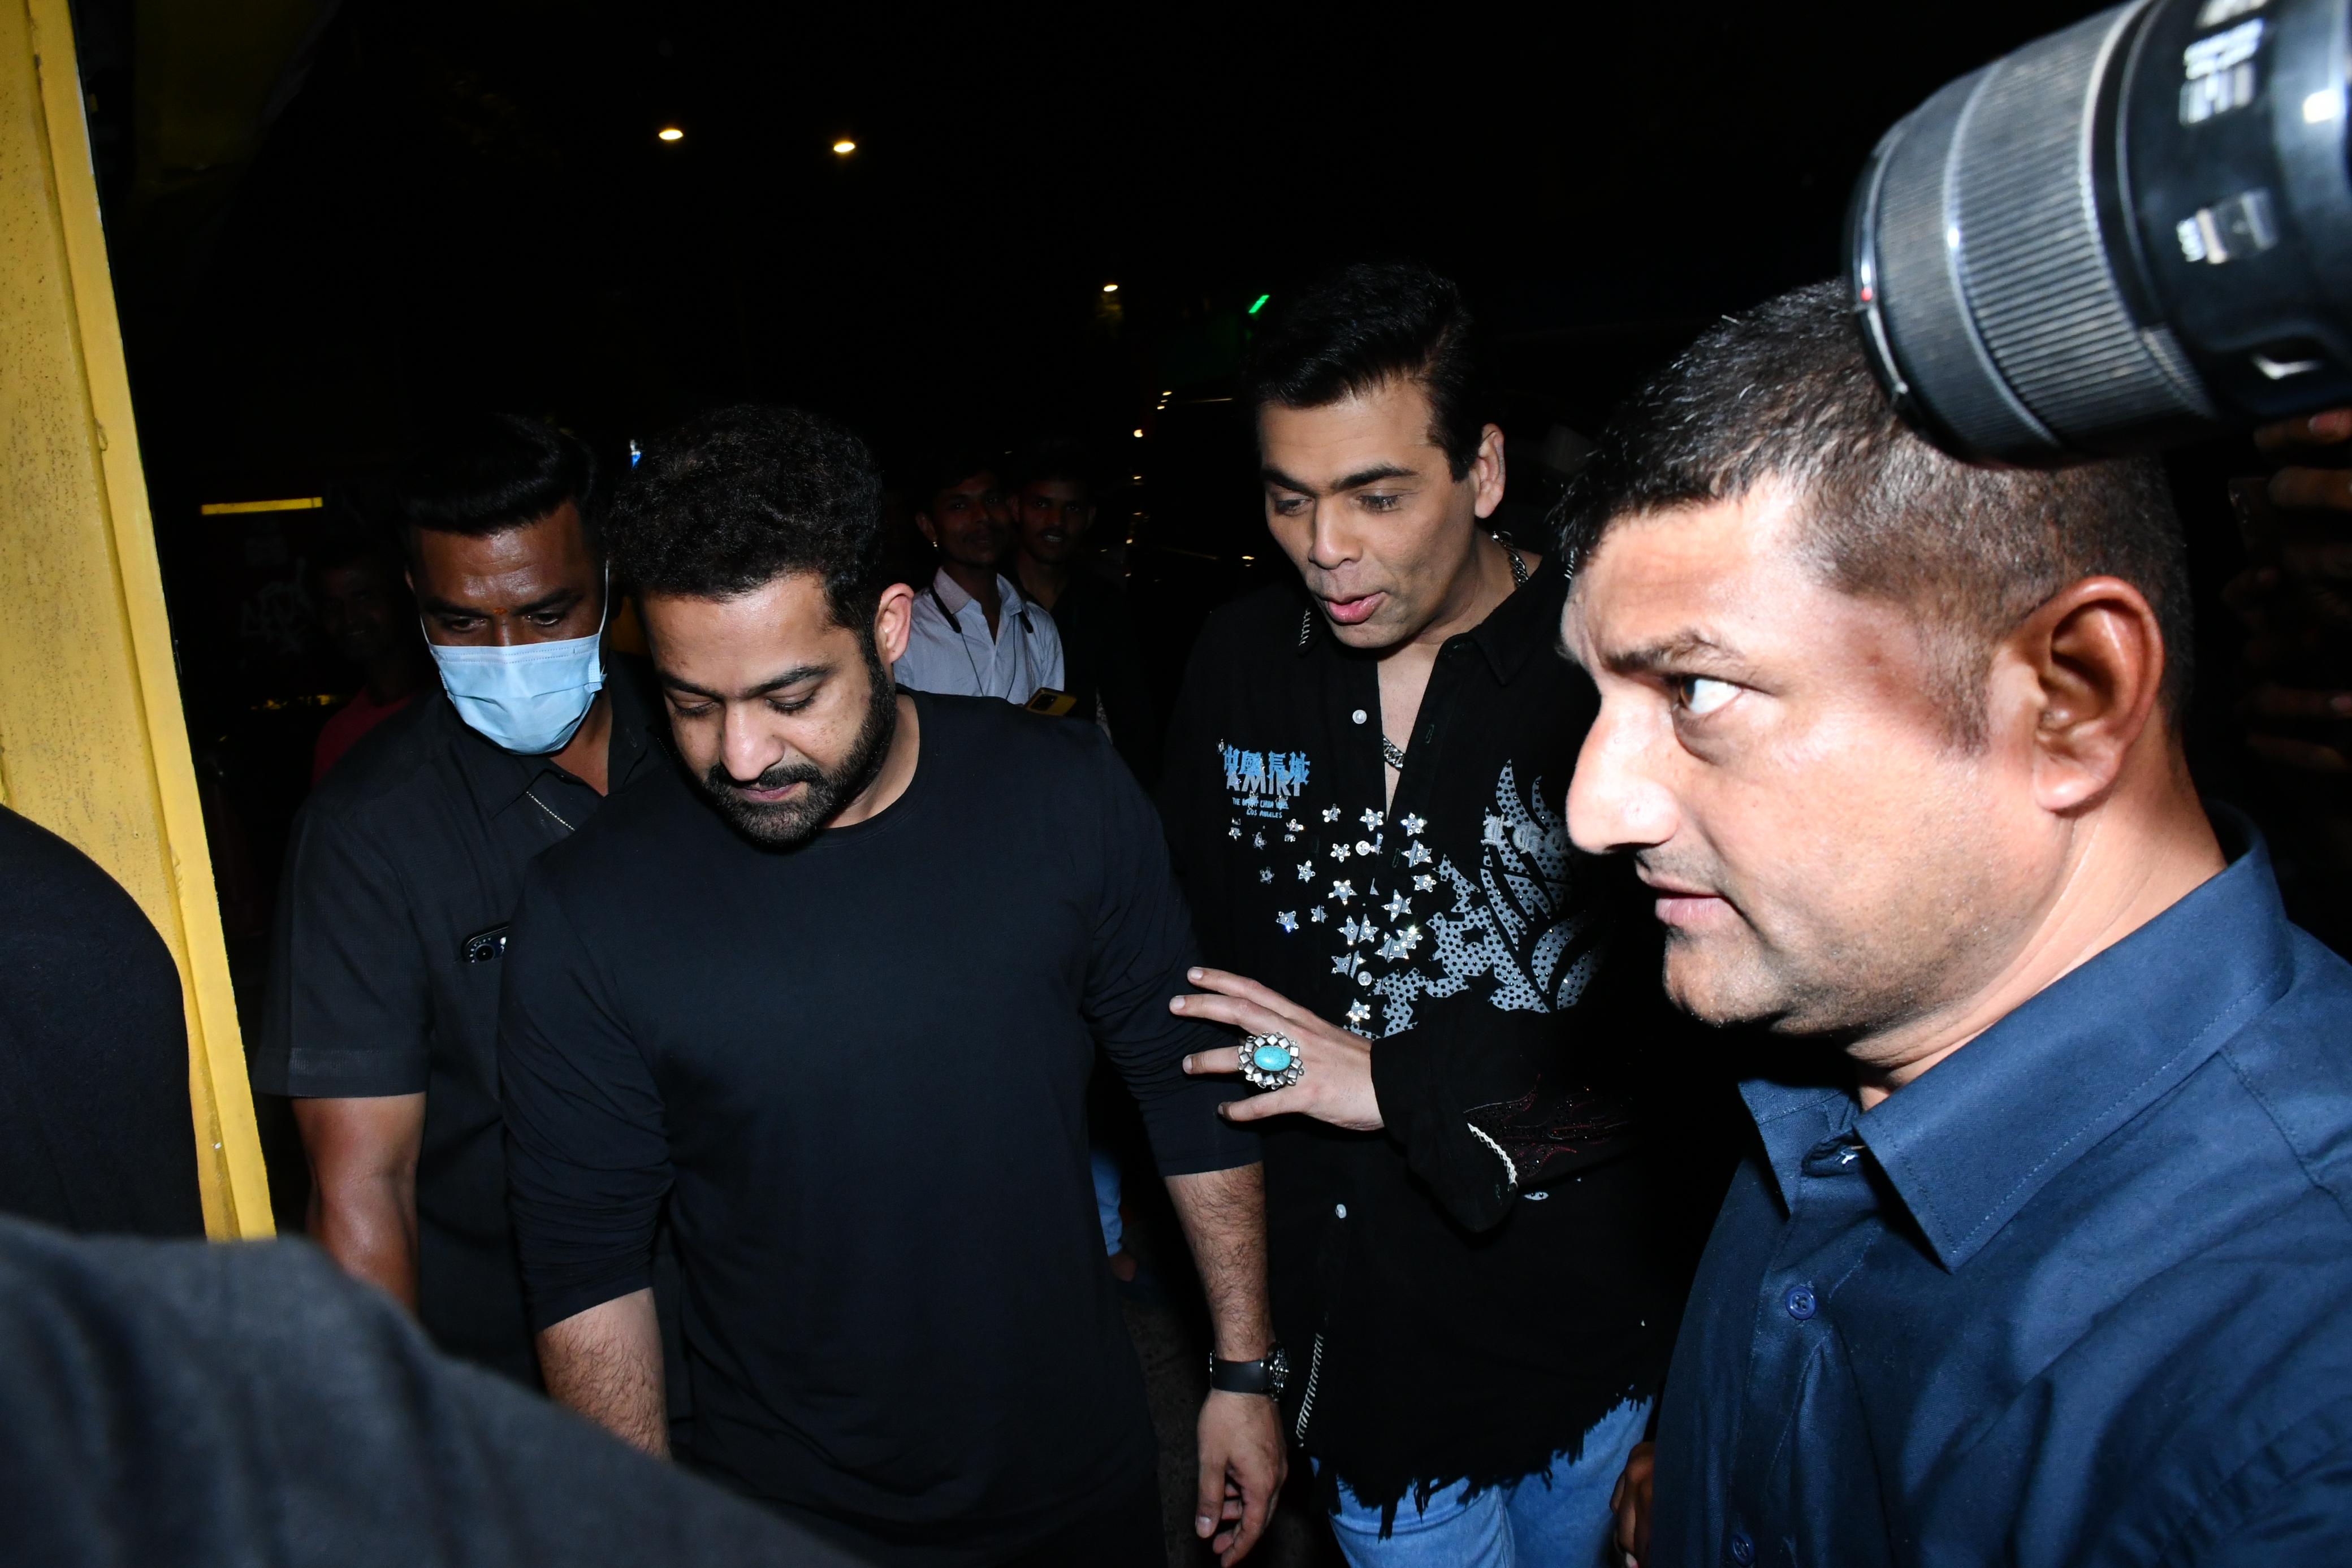 Ace filmmaker Karan Johar was also invited to the intimate bash at the Veronica restaurant last night